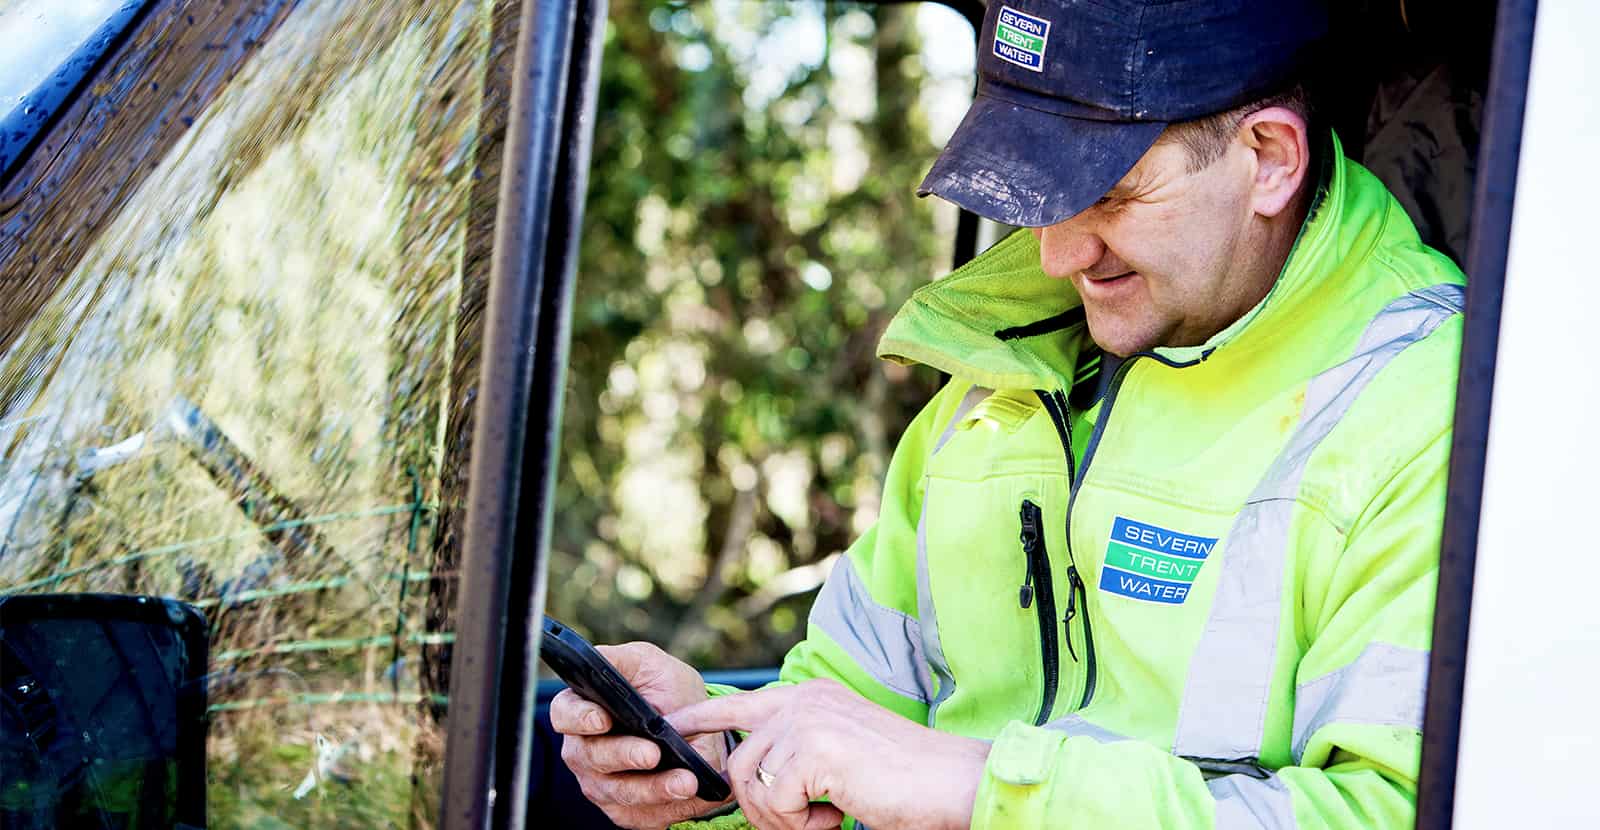 Severn Trent Customer Experience Redesign